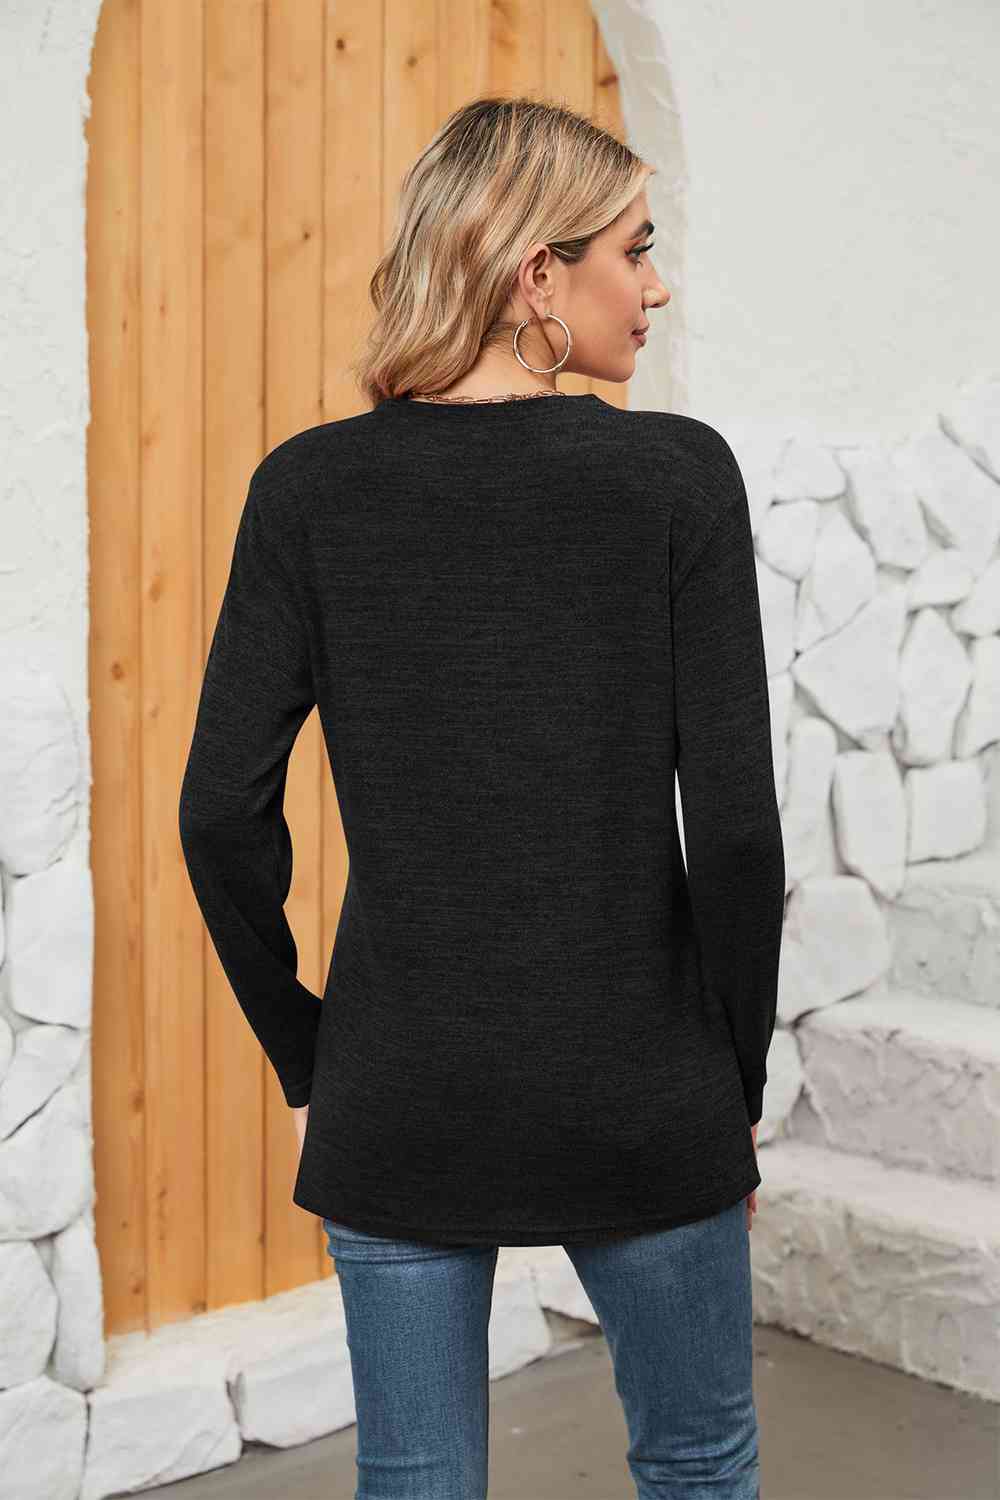 Dark Slate Gray Notched Neck Long Sleeve T-Shirt Sentient Beauty Fashions Apparel & Accessories